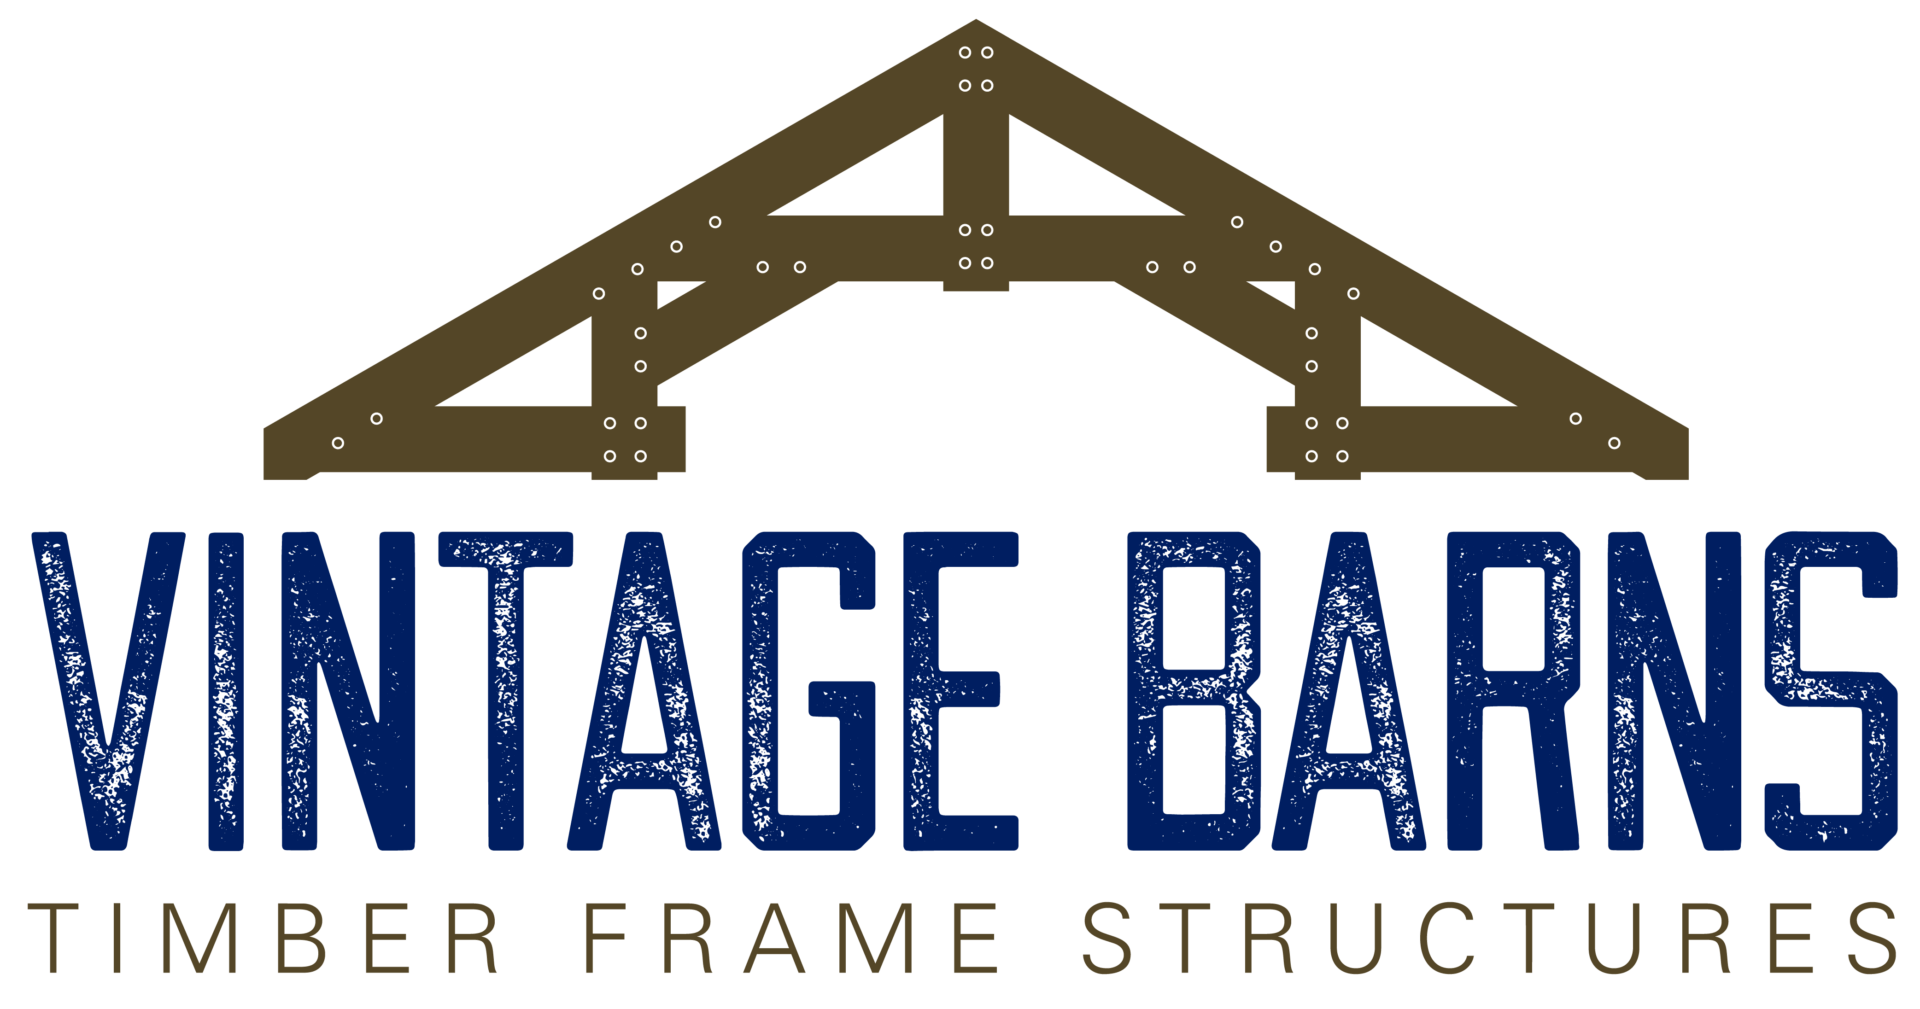 Vintage Barns - Timber Frame Structures in Middle Tennessee